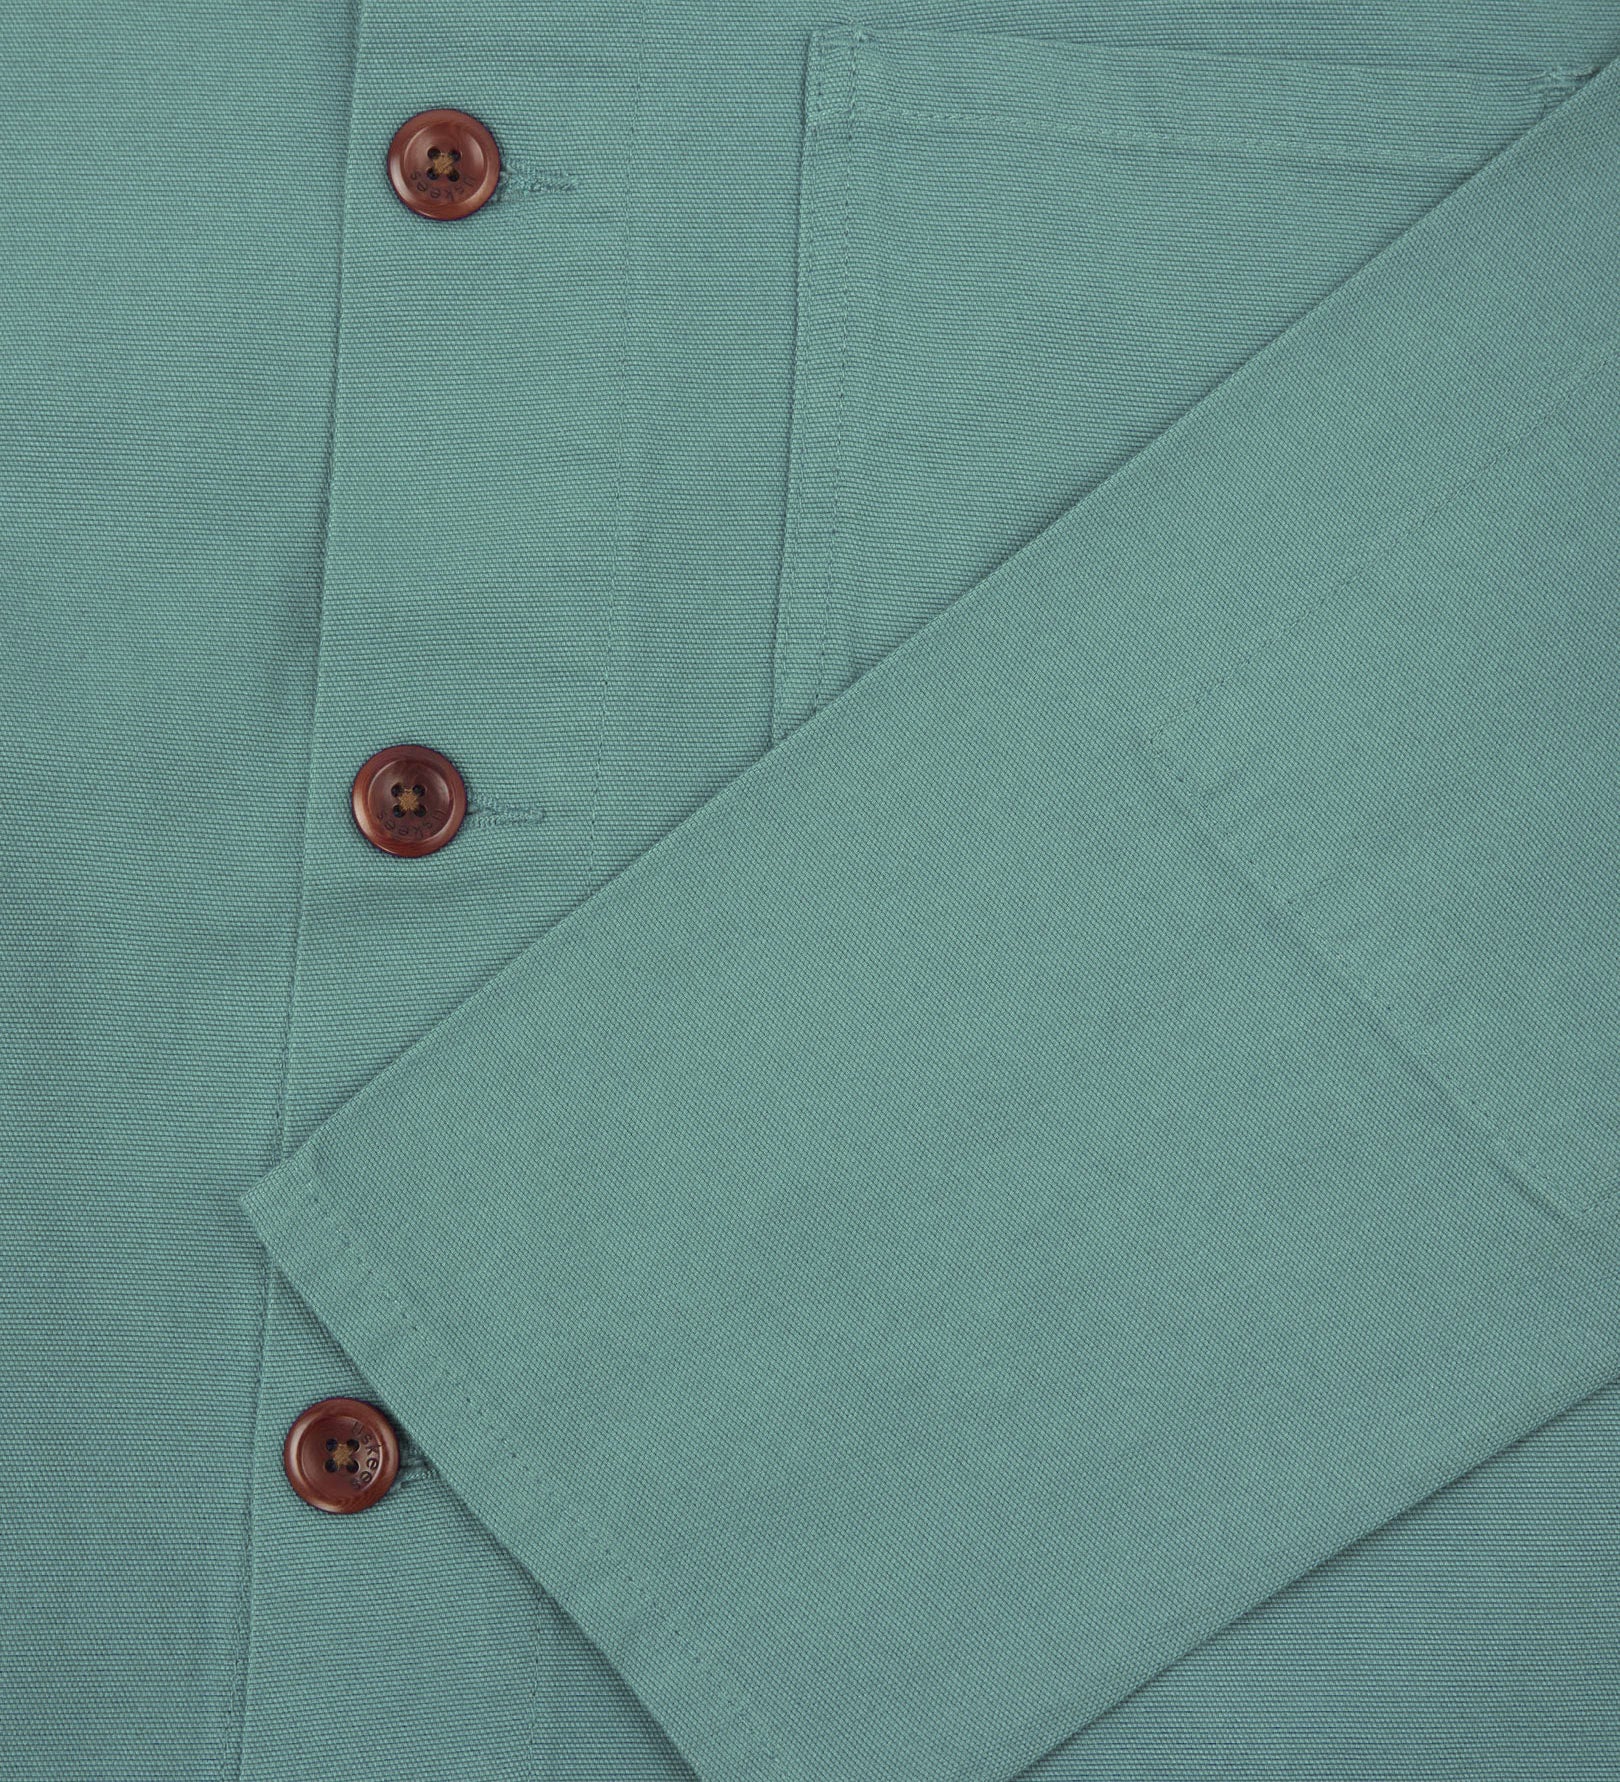 Closer view of mid section of blue-green (eucalyptus), buttoned organic cotton overshirt from Uskees. Focus on cuff, pockets and corozo buttons.